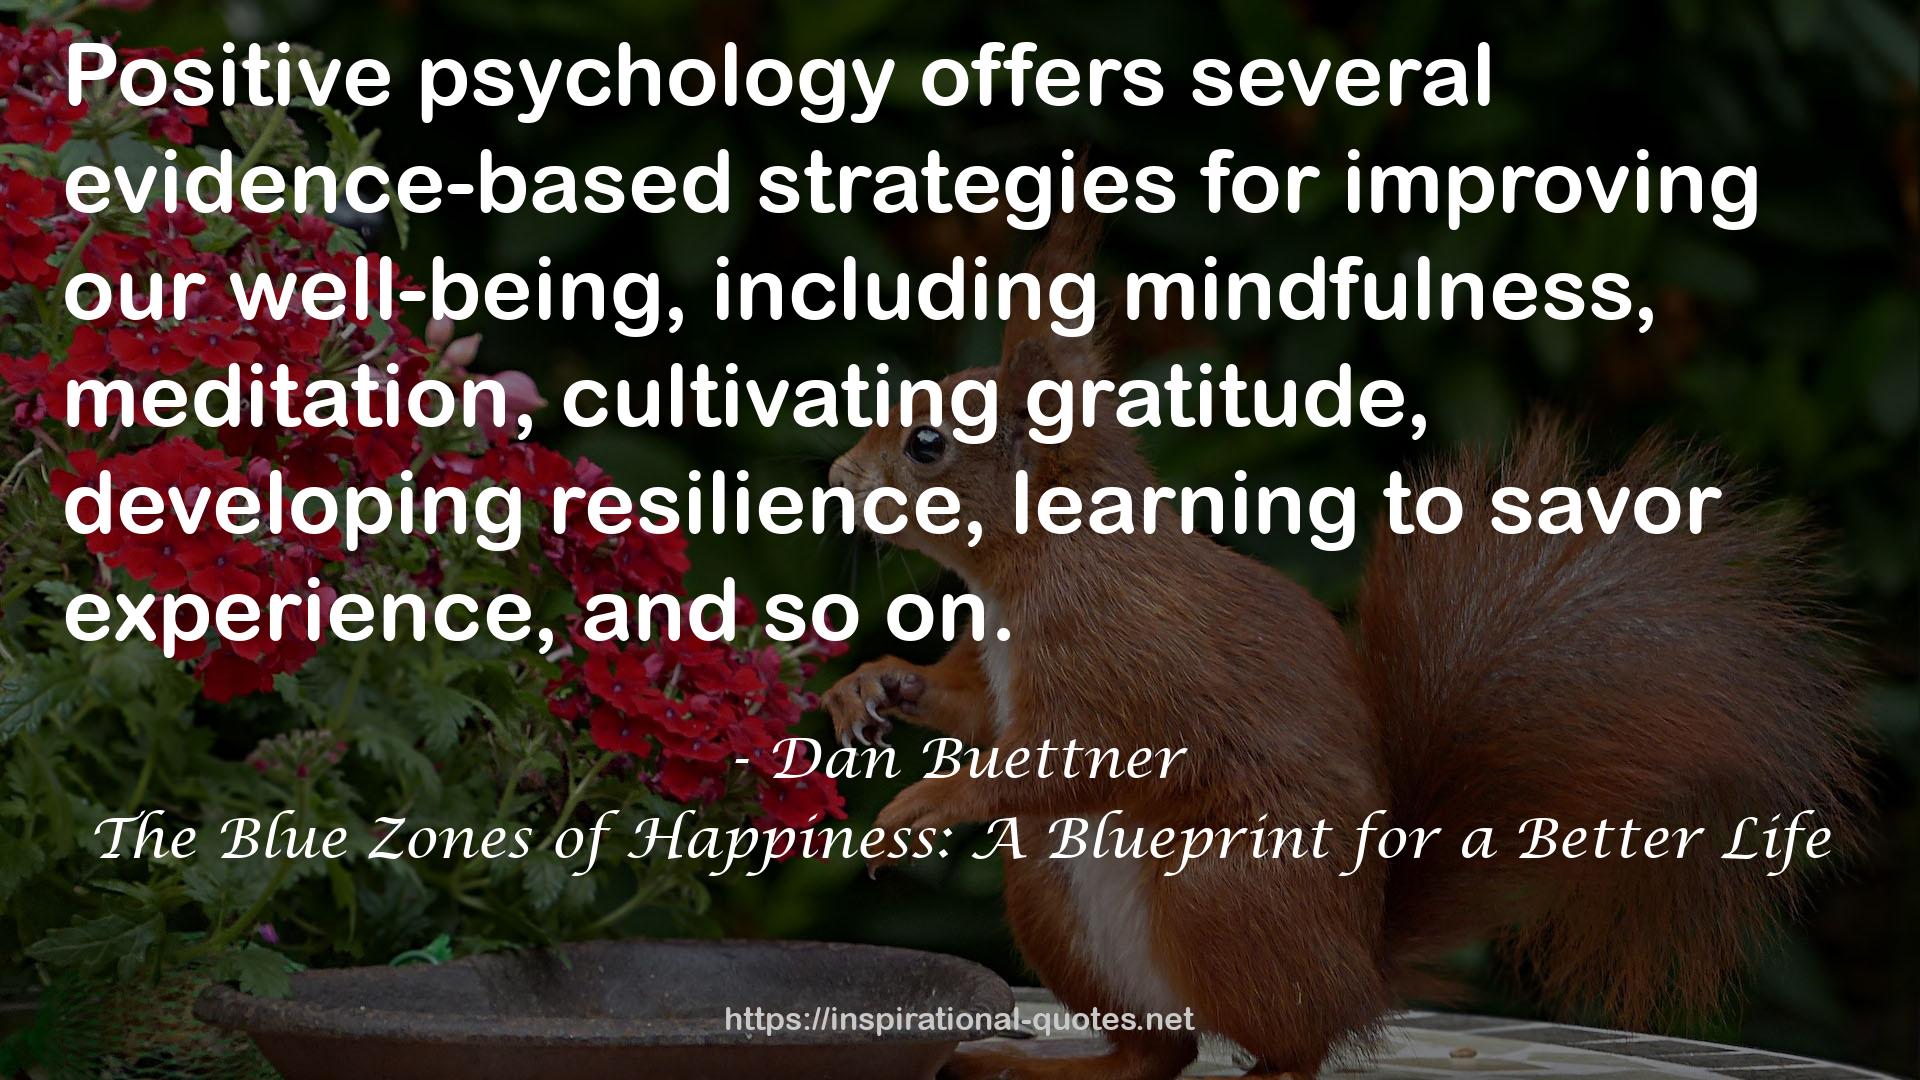 The Blue Zones of Happiness: A Blueprint for a Better Life QUOTES